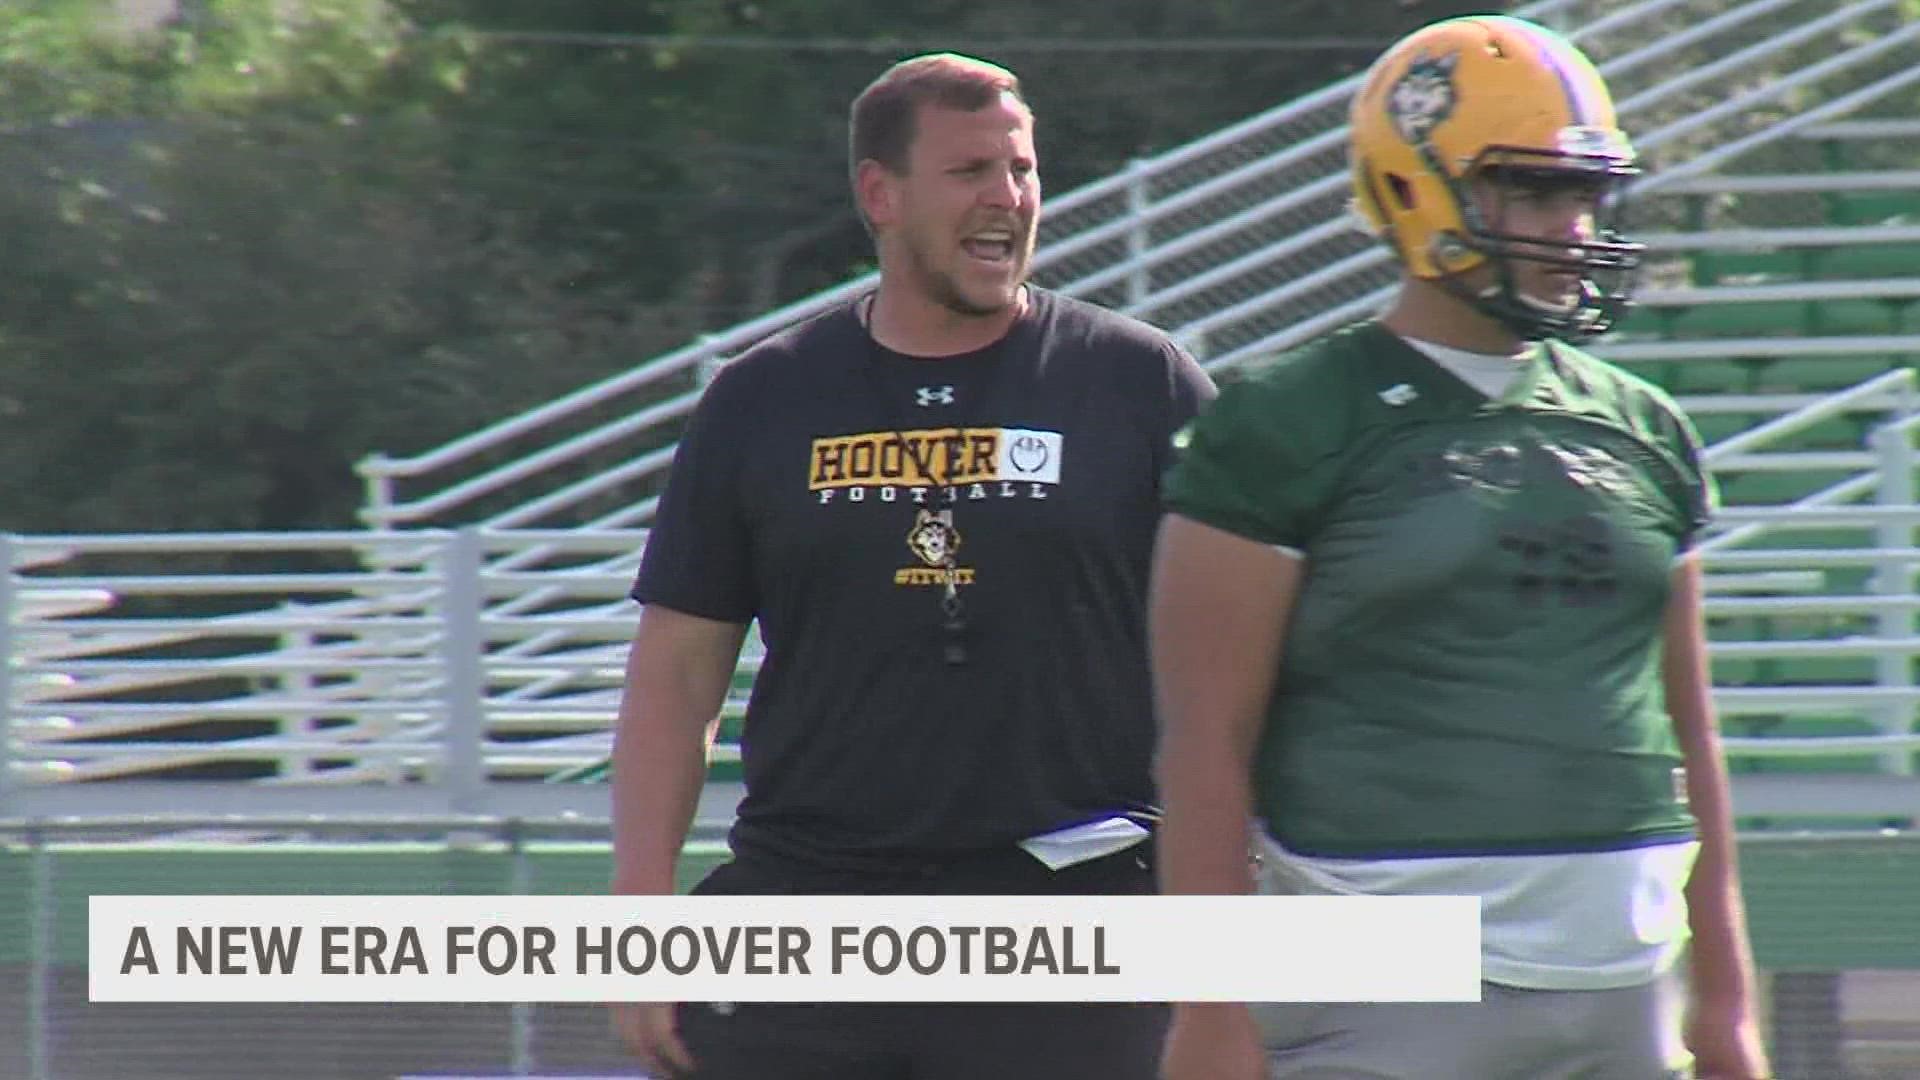 Coach Theo Evans graduated from Hoover a little over a decade ago. Now, he's back to help rebuild the football program.